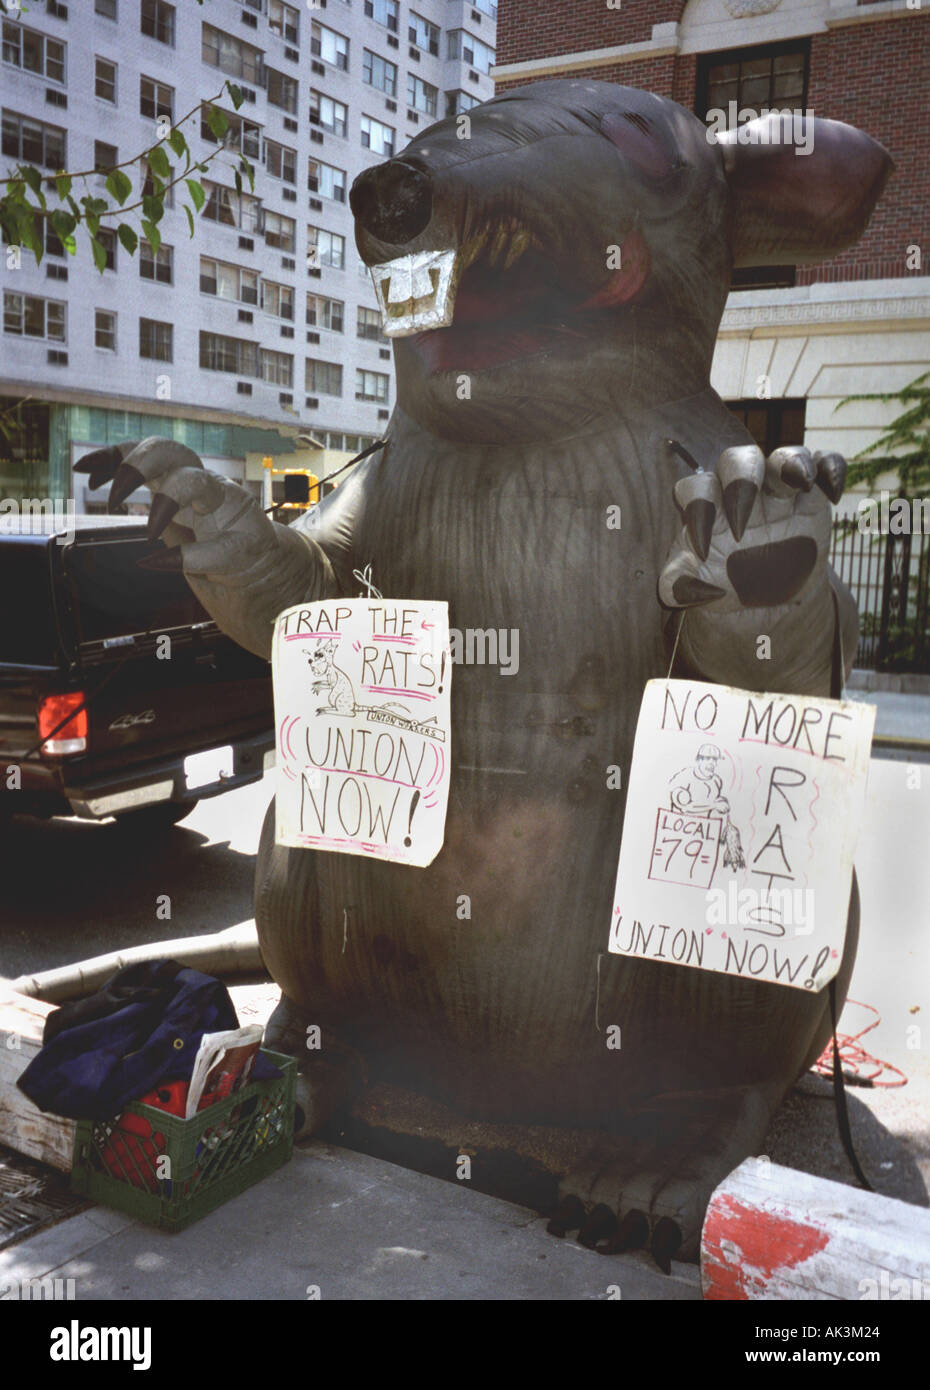 A huge inflated rat is hung with pro construction union signs at a building site in New York City Non union workers are referre Stock Photo